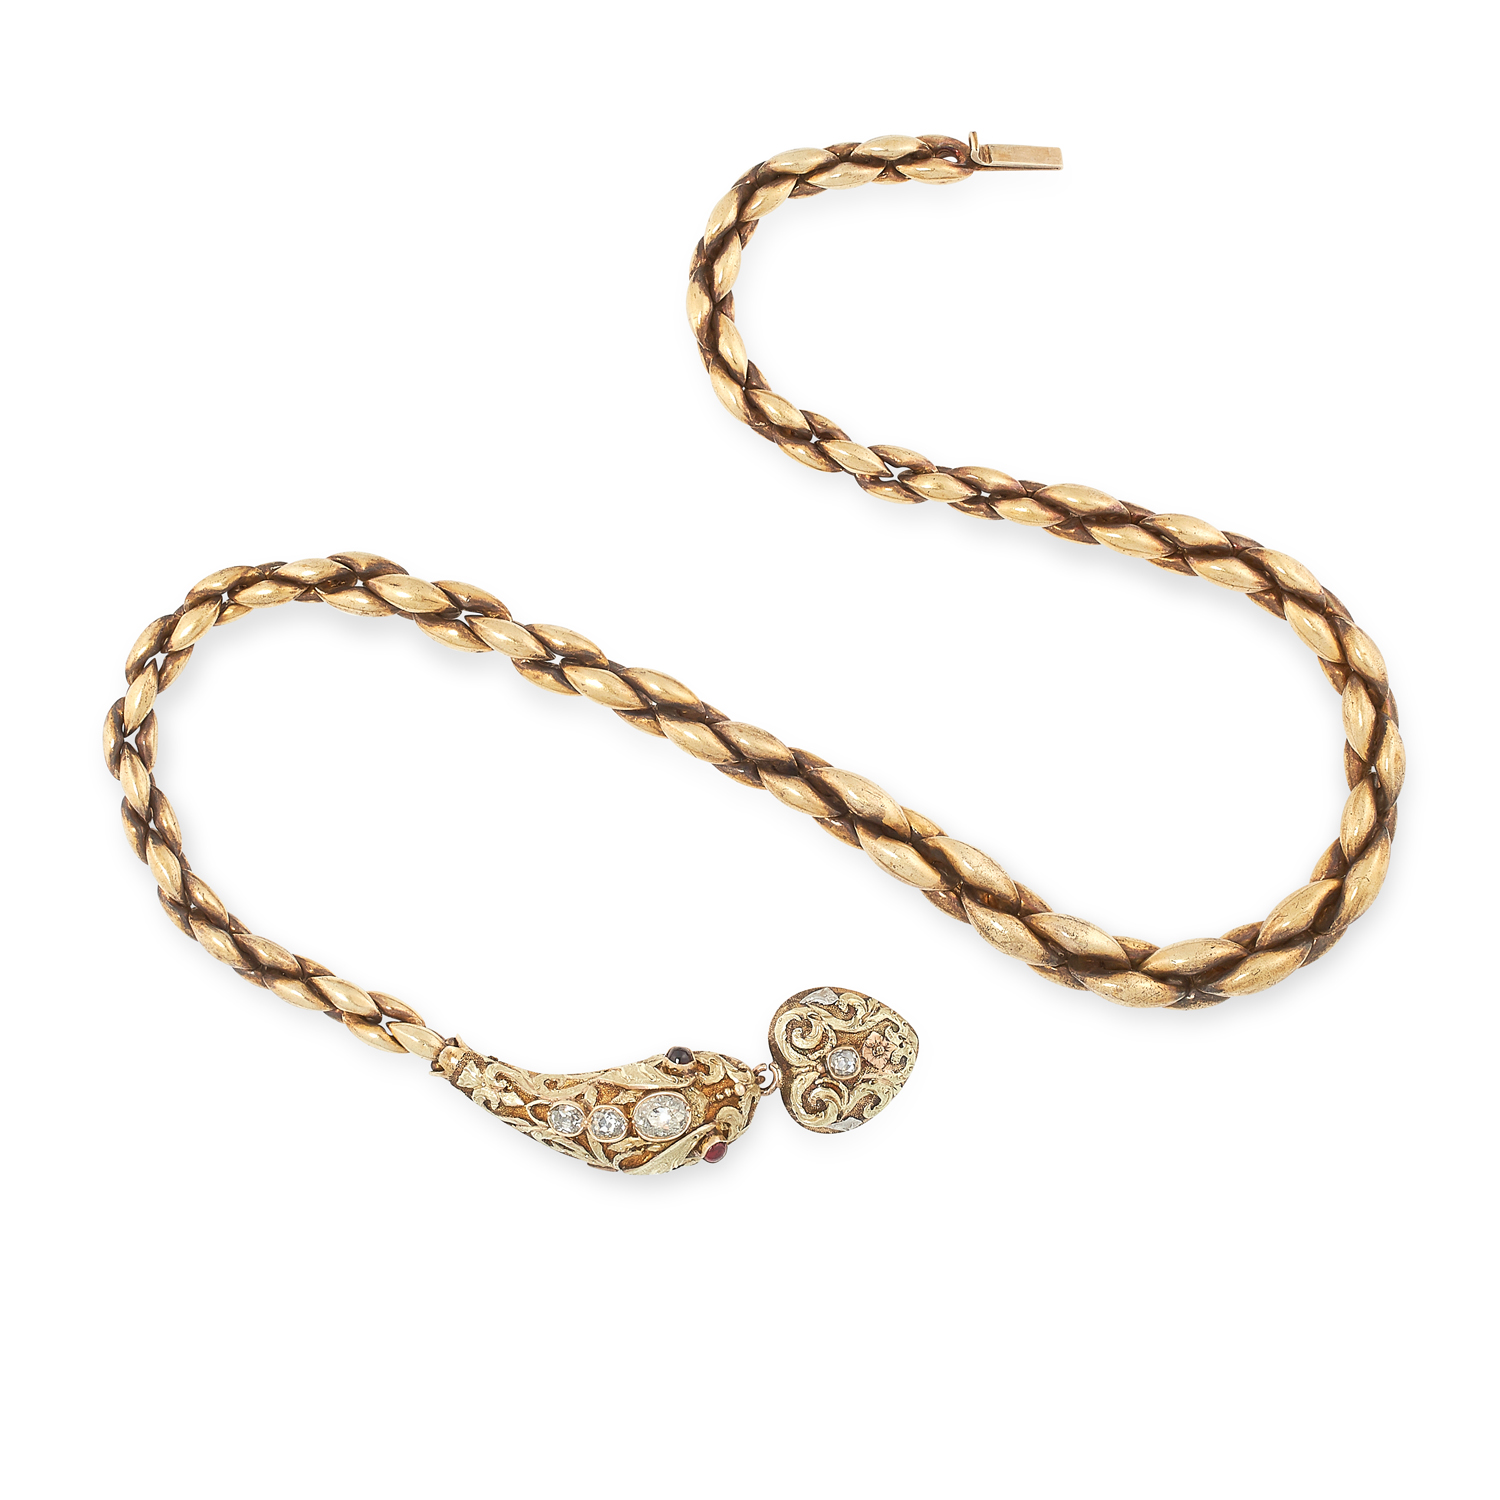 AN ANTIQUE DIAMOND AND GARNET SNAKE NECKLACE in high carat yellow gold, comprising a fancy link